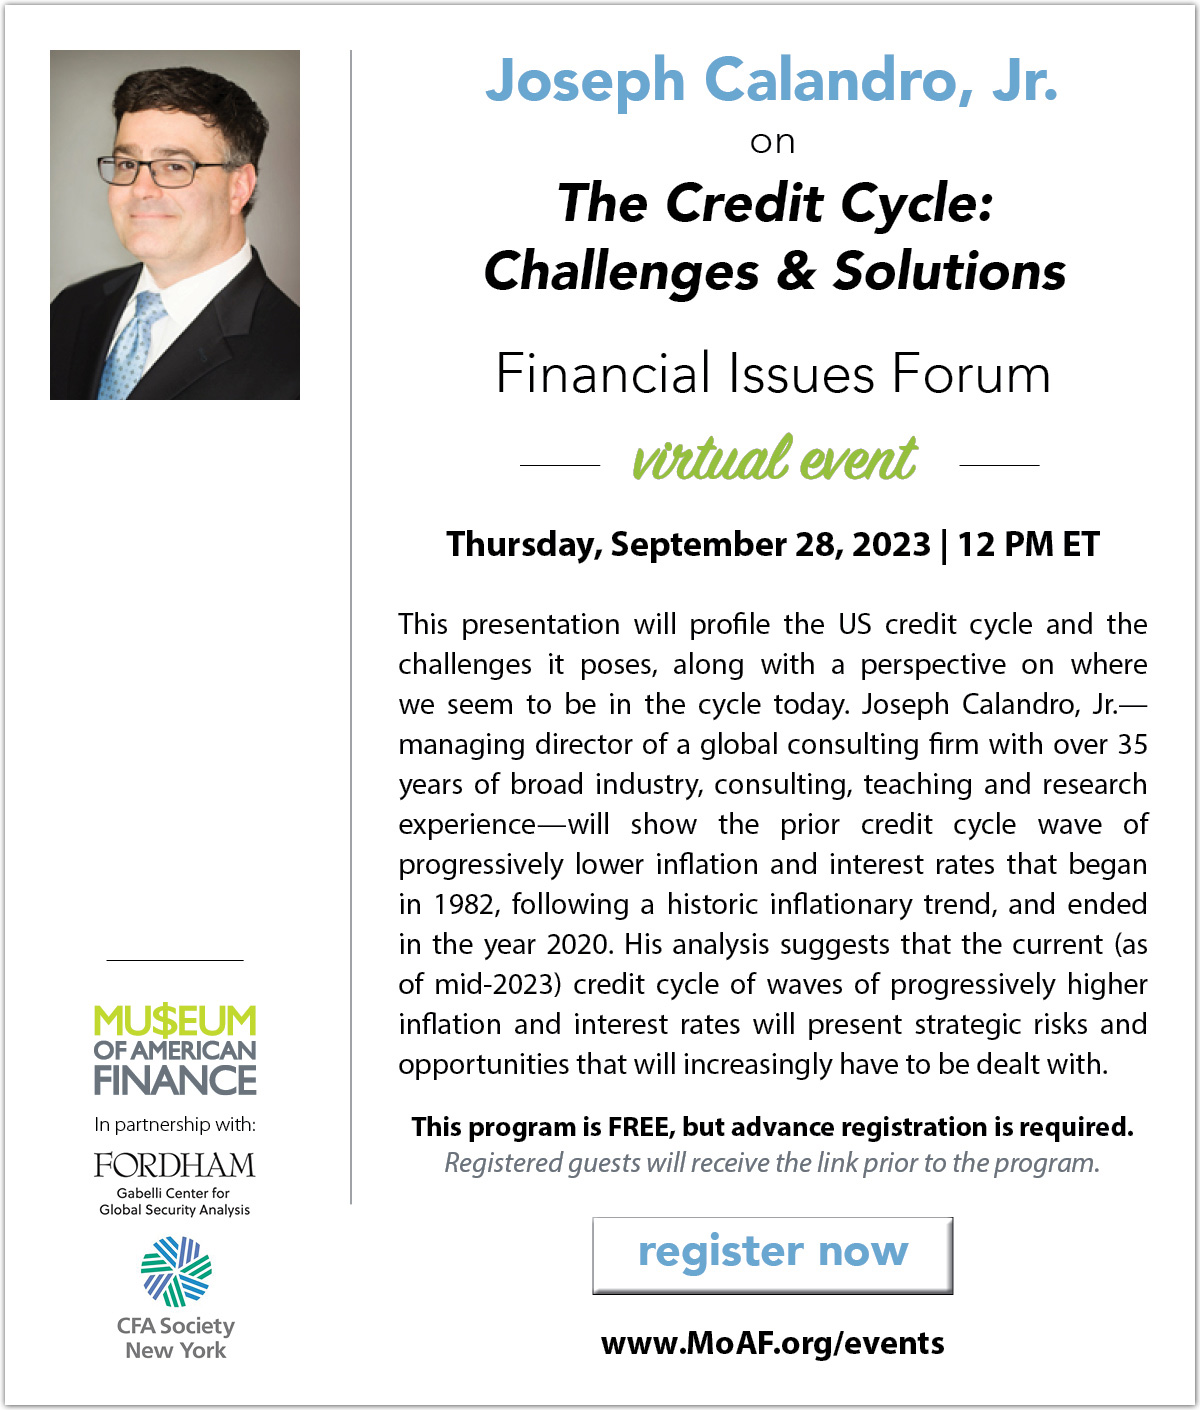 Joe Calandro on The Credit Cycle: Challenges and Solutions